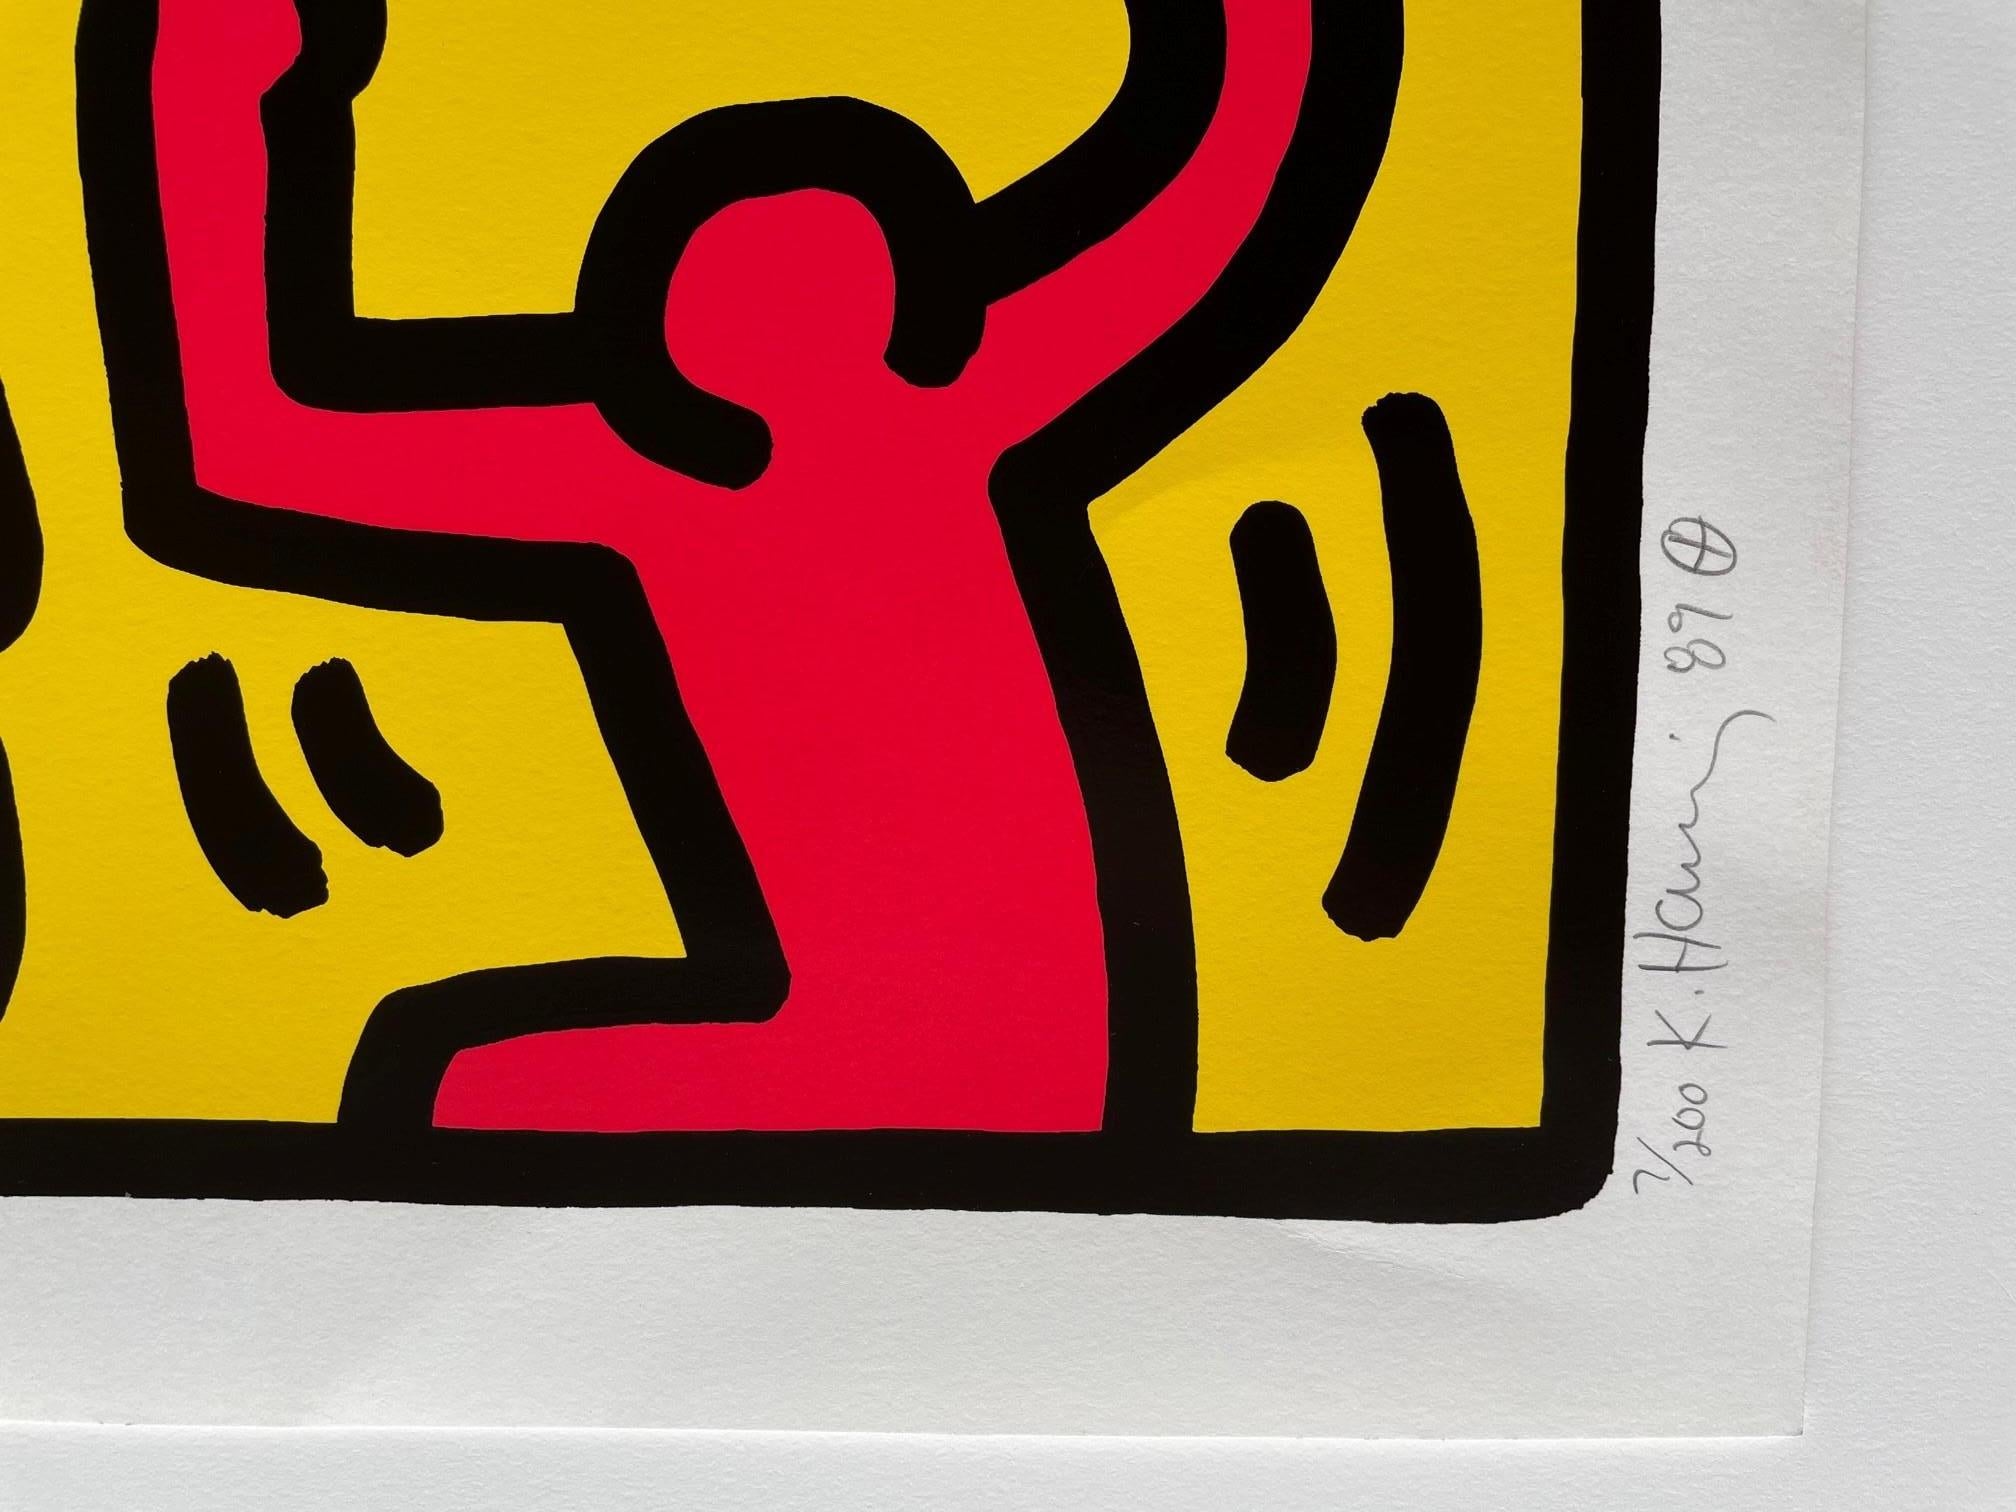 Pop Shop IV 1989 (2) - Print by Keith Haring